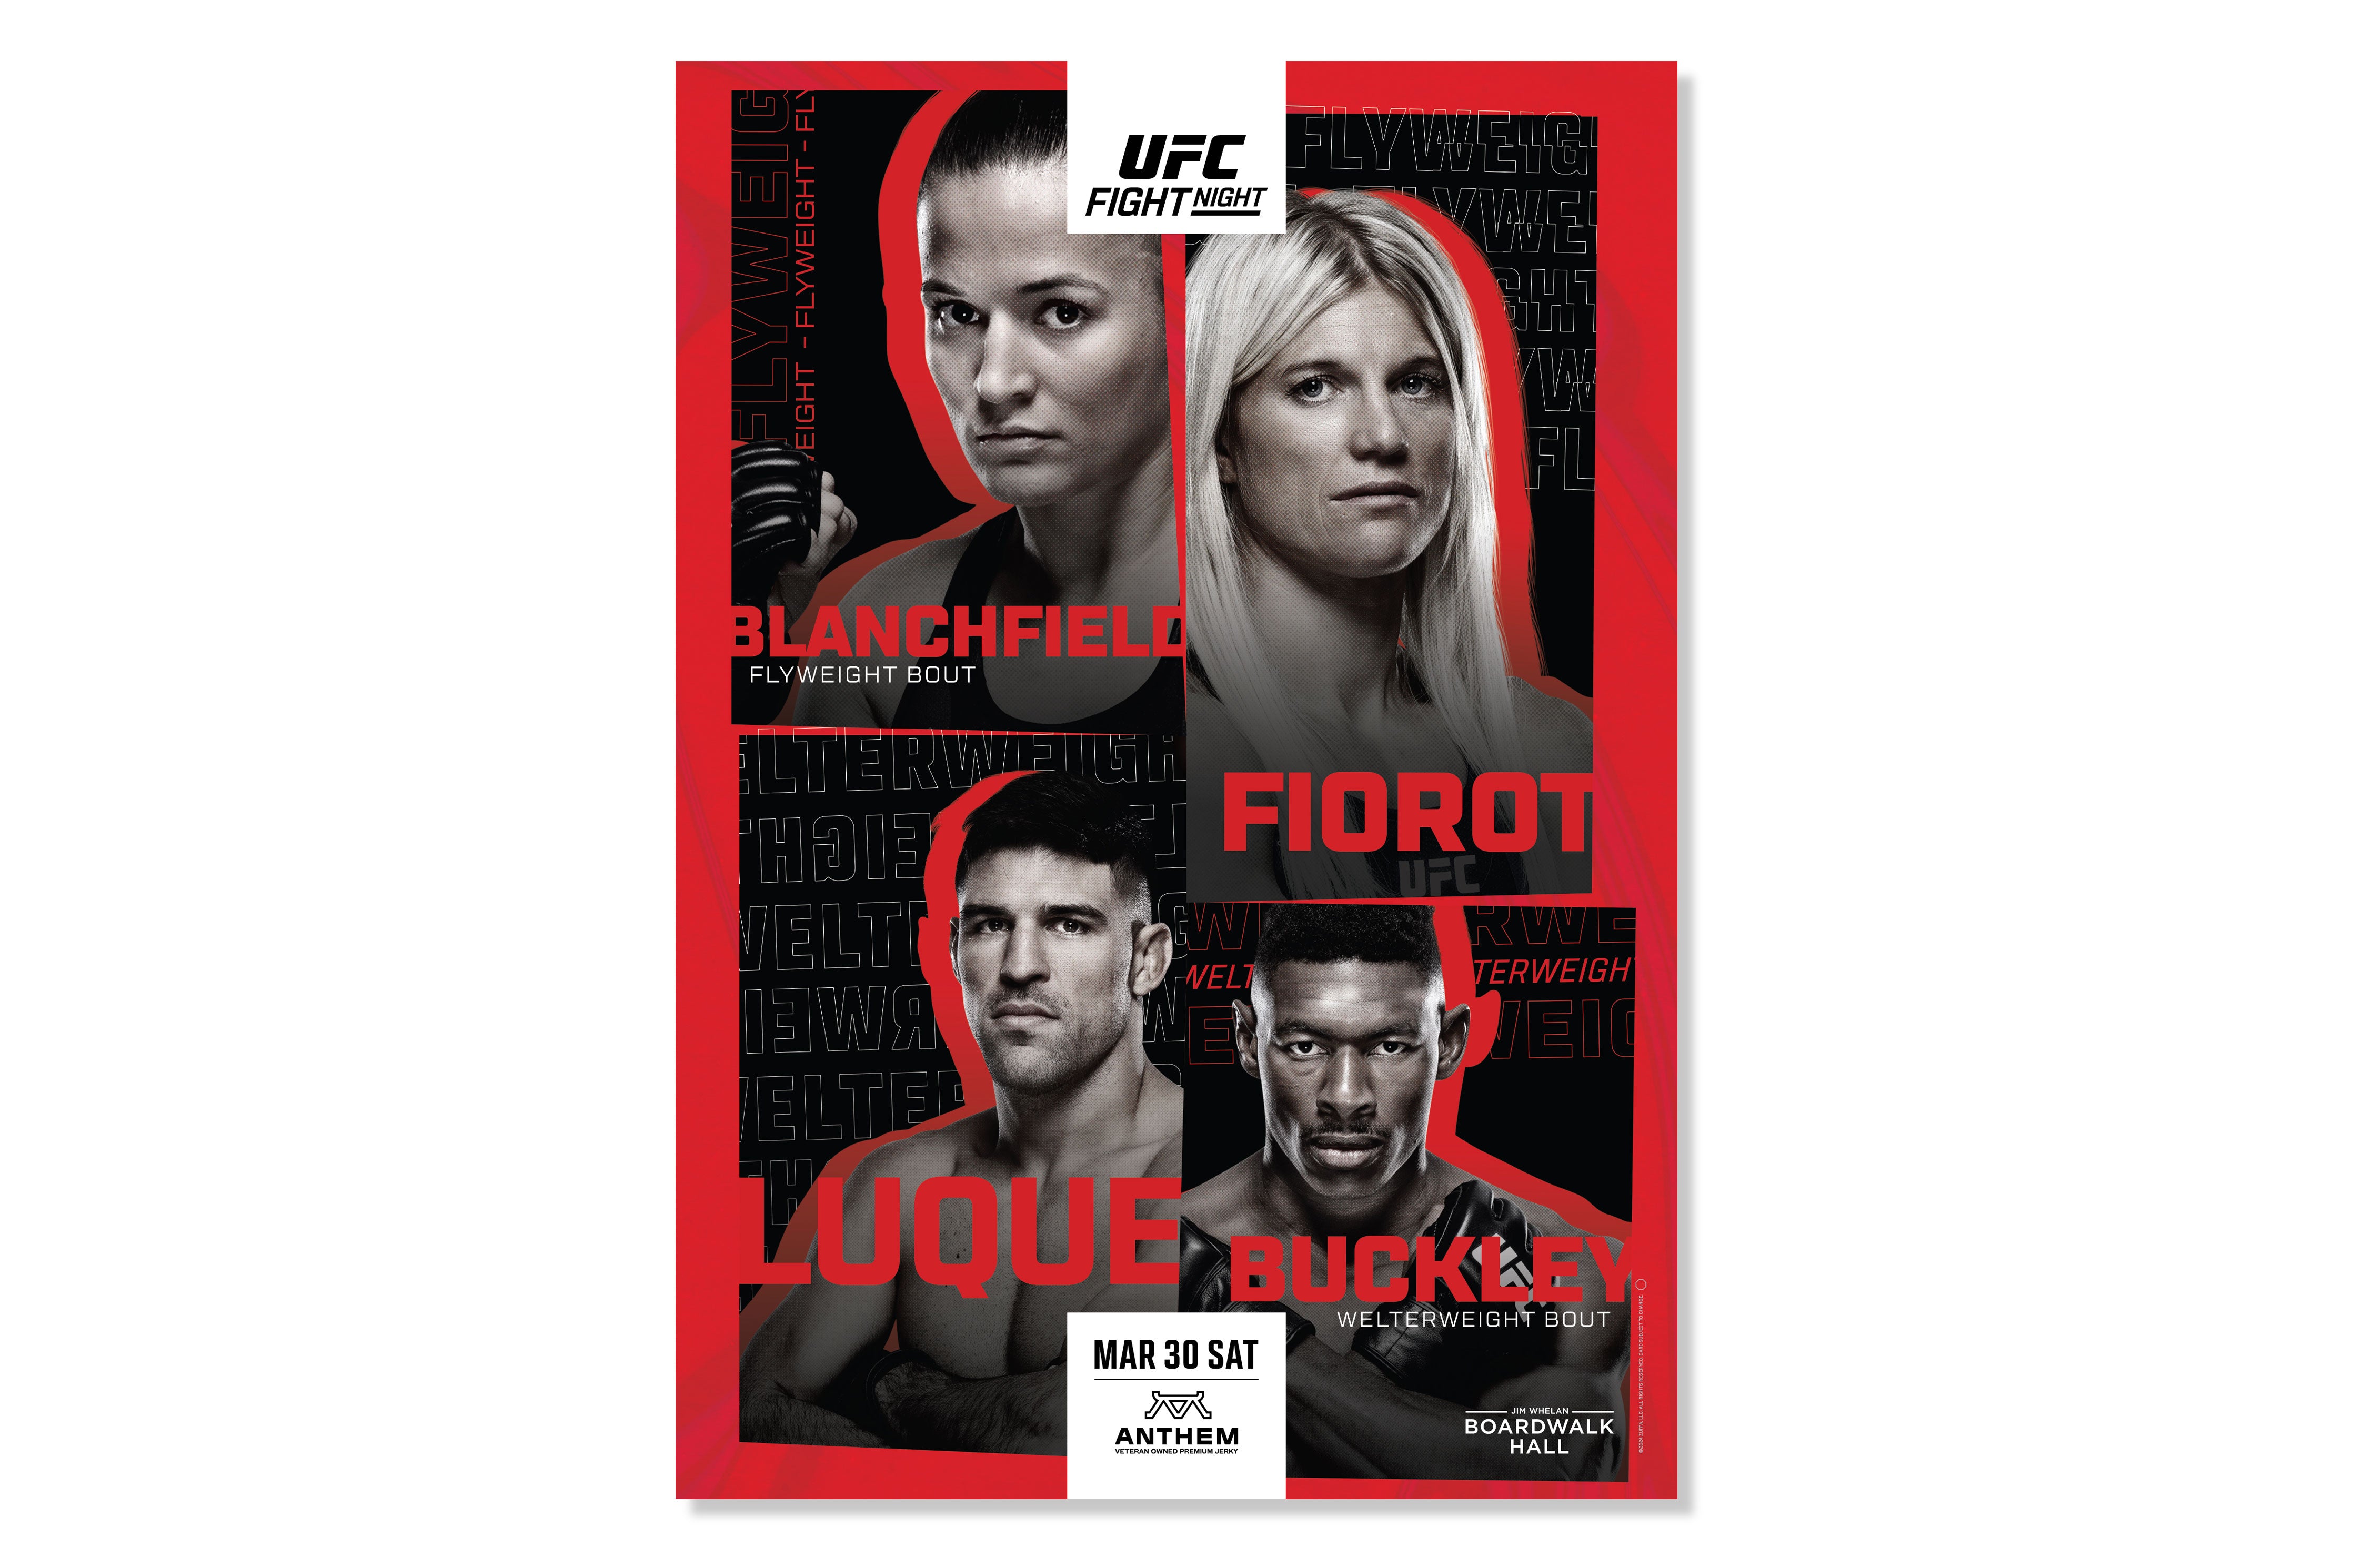 UFC Fight Night: Blanchfield vs Fiorot Autographed Event Poster